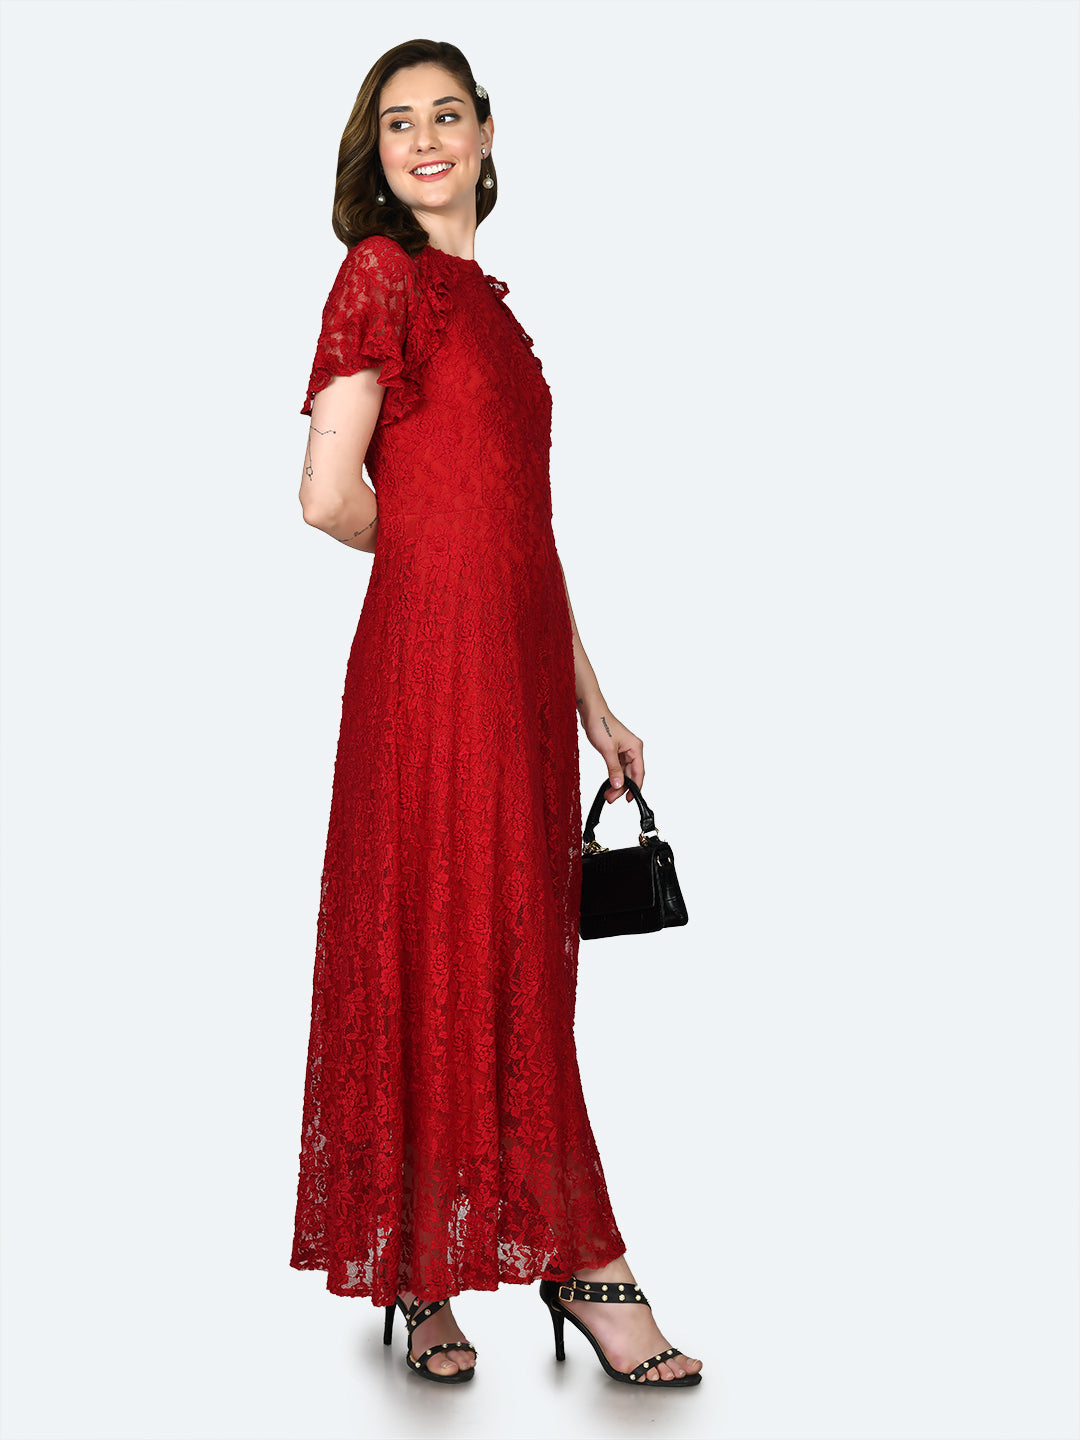 Red Lace Ruffled Maxi Dress For Women